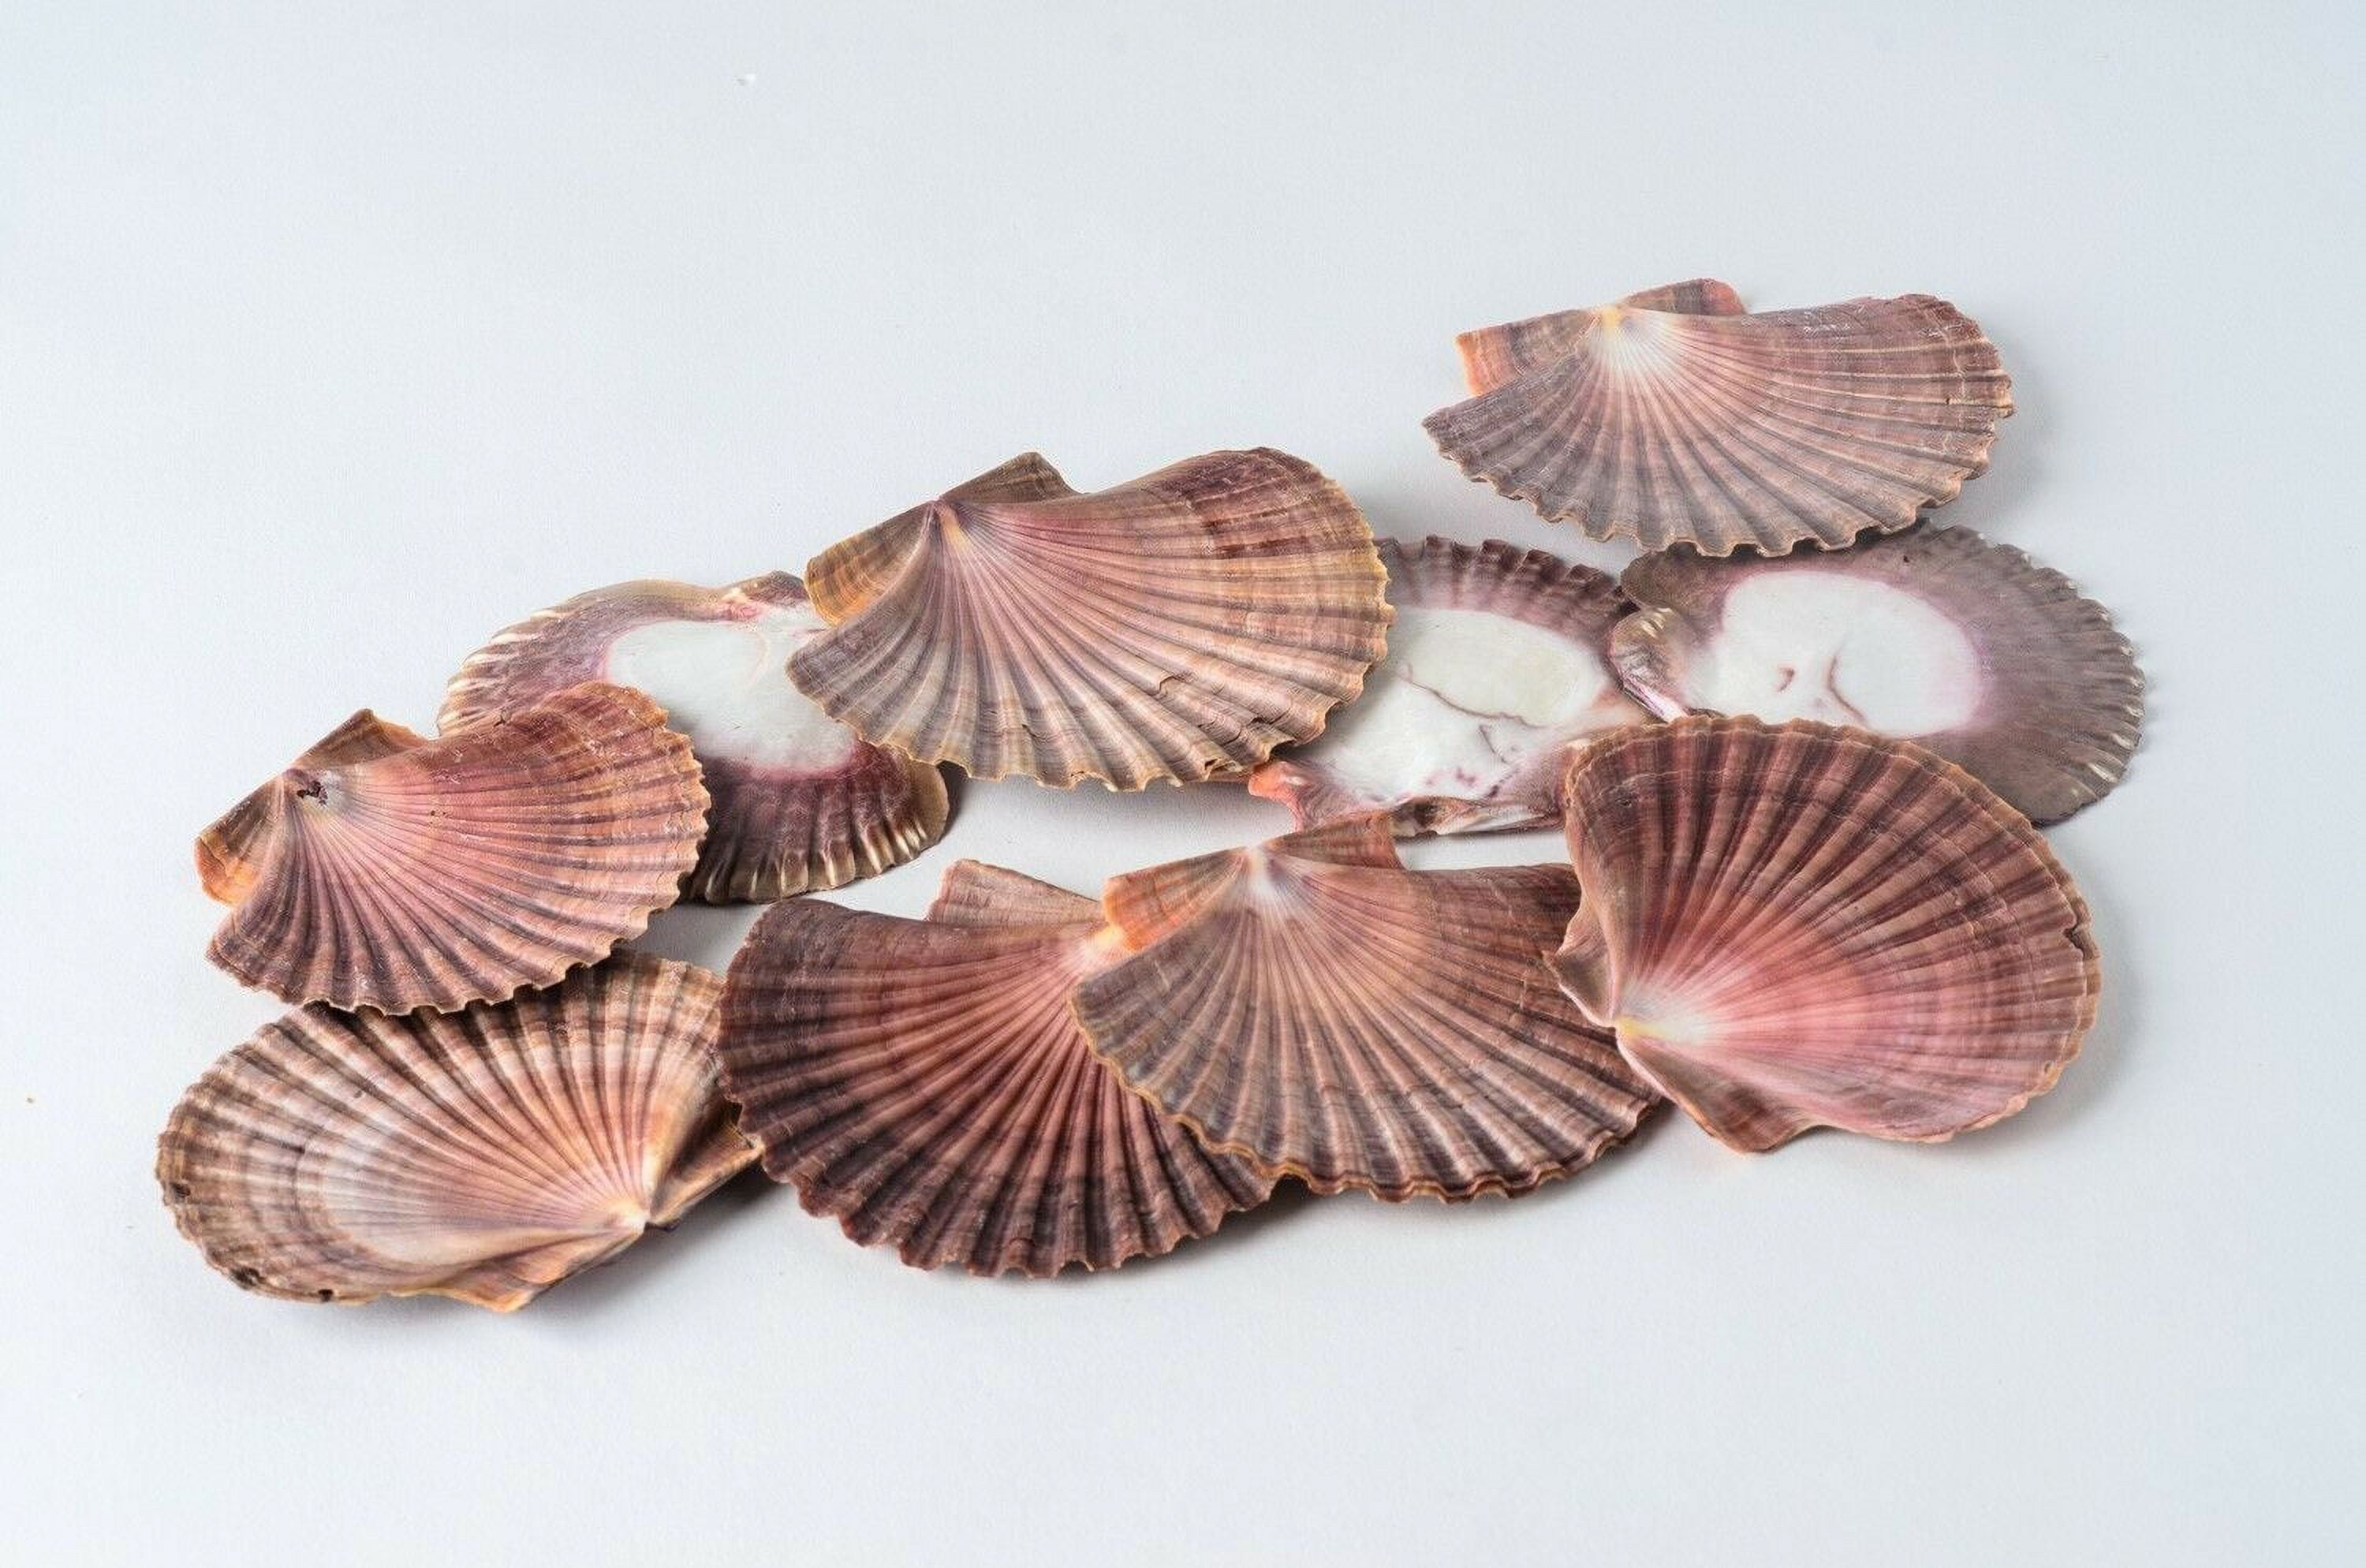  LUCKY BABY Scallop Shells White Natural Sea Shells for Crafts  16pcs 2.7-3.5 Inches Seashells for DIY Crafting Beach Wedding Home  Decoration Baking : Home & Kitchen